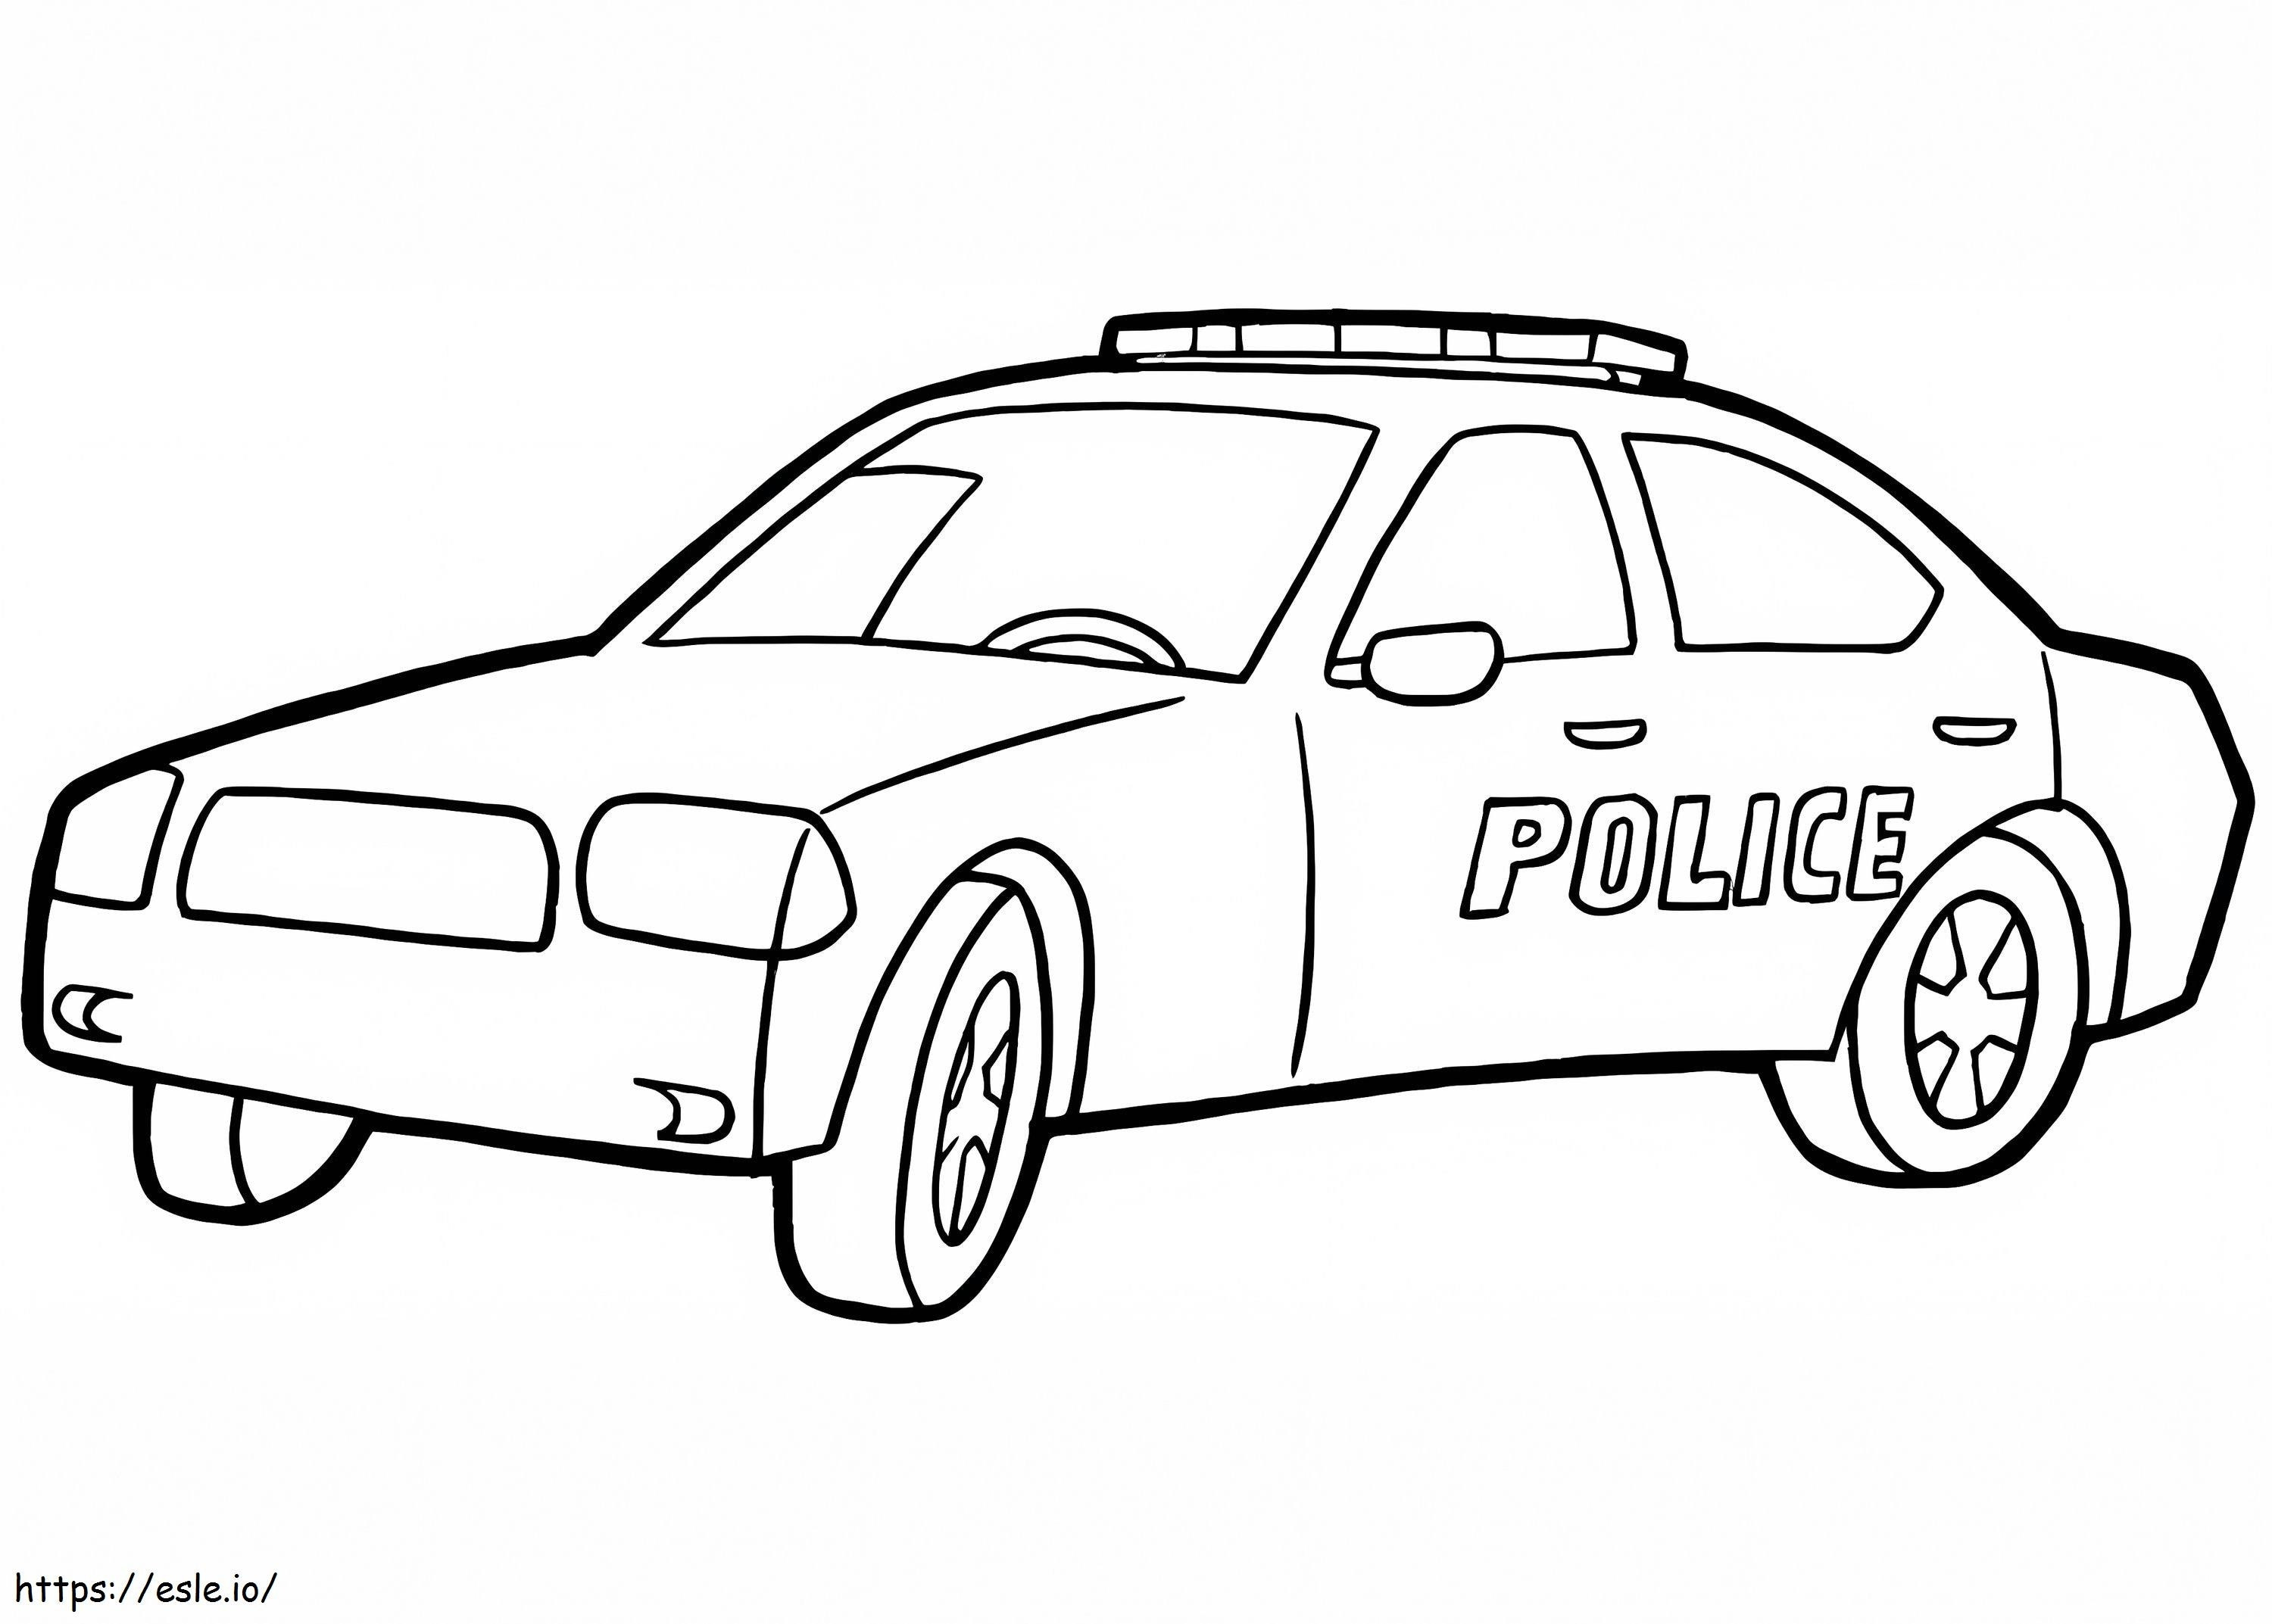 Police Car 18 coloring page